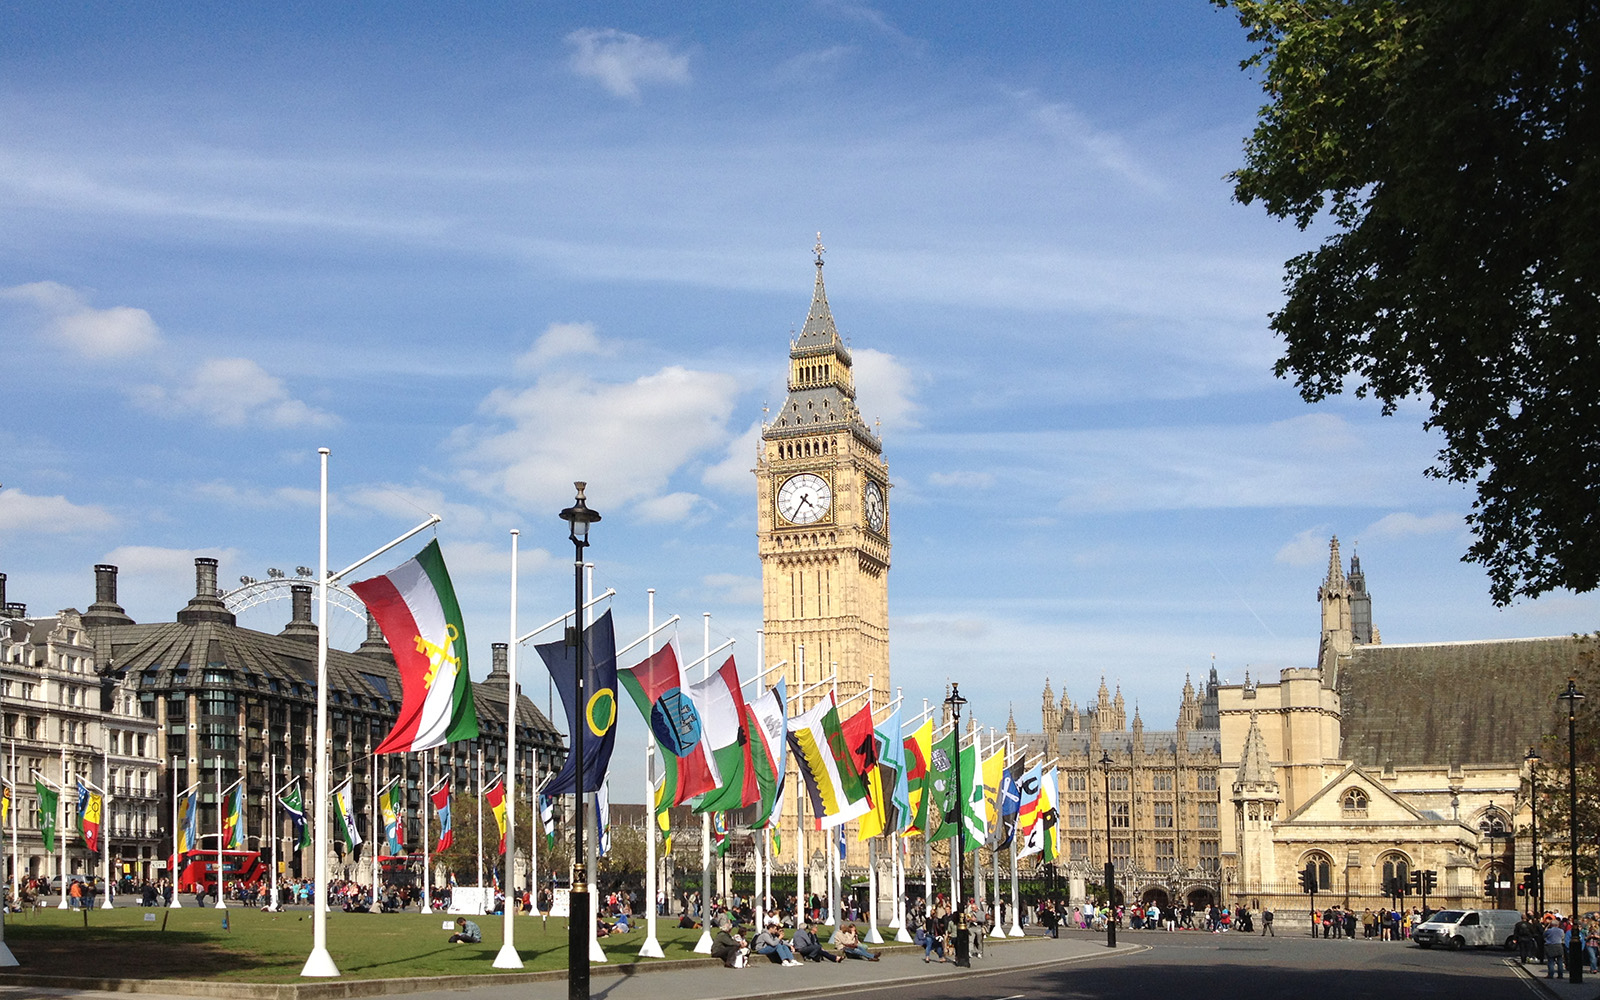 Big Ben Houses Of Parliament Square, 15 May 2015